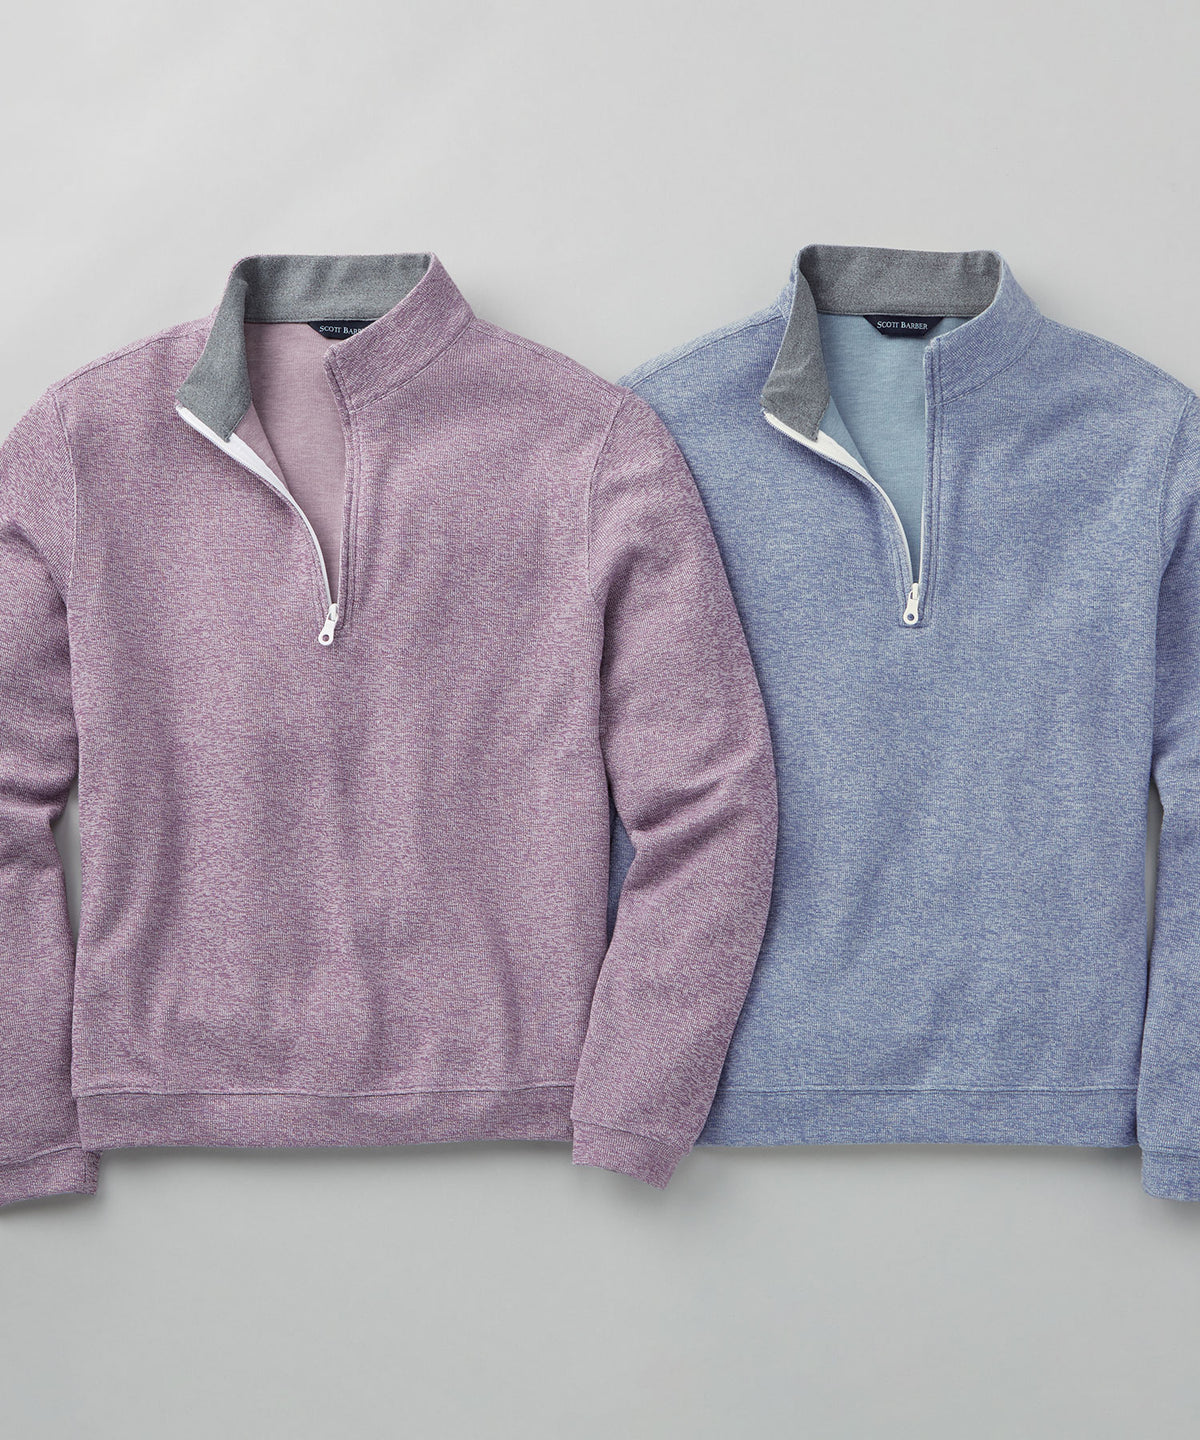 Marled Sweater Knit Quarter-Zip Pullover